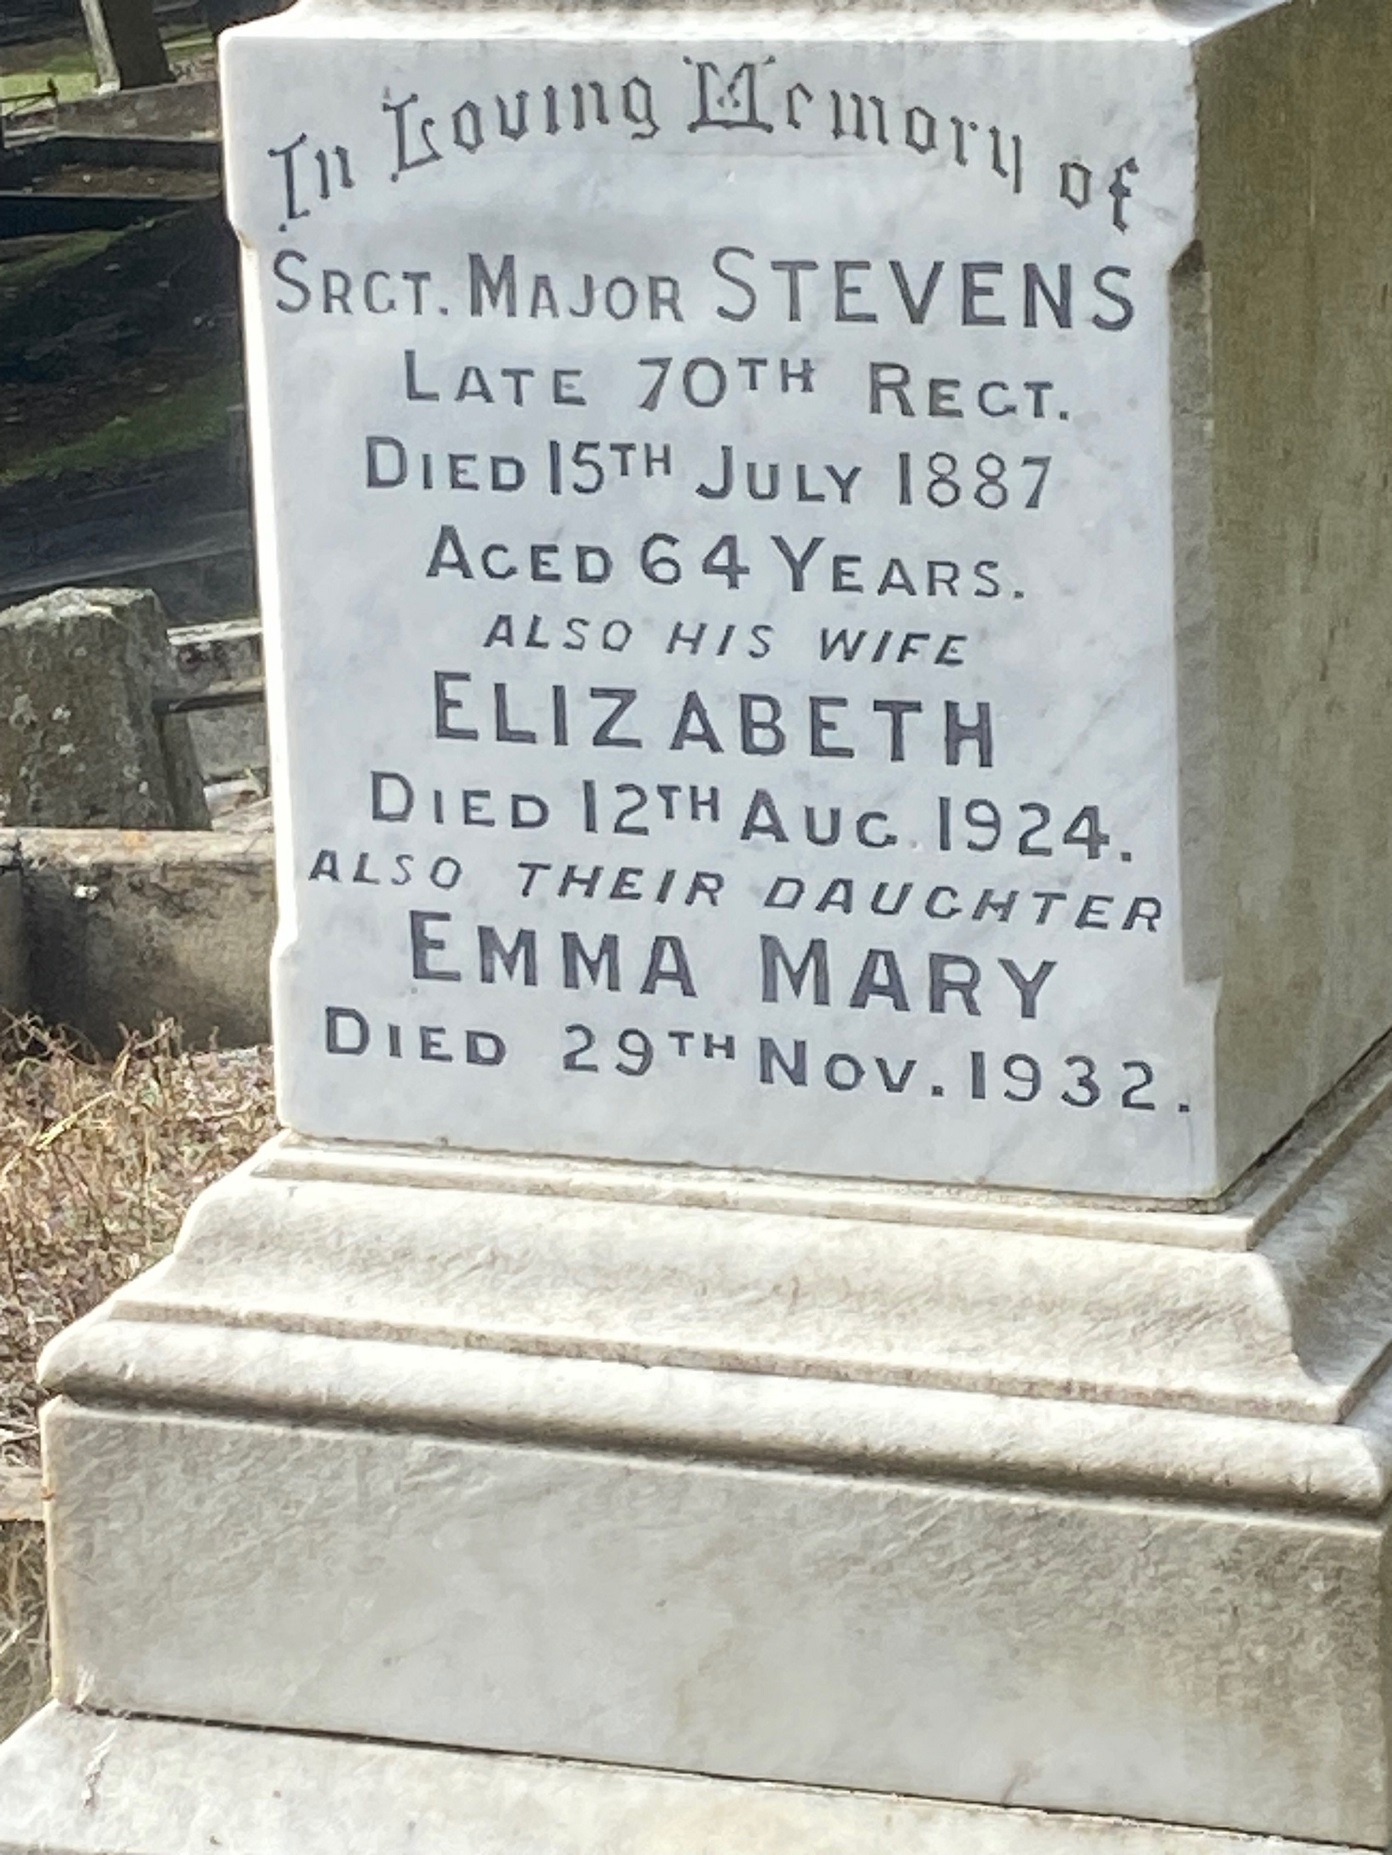 The Stevens’ family grave is in Dunedin’s Southern Cemetery.